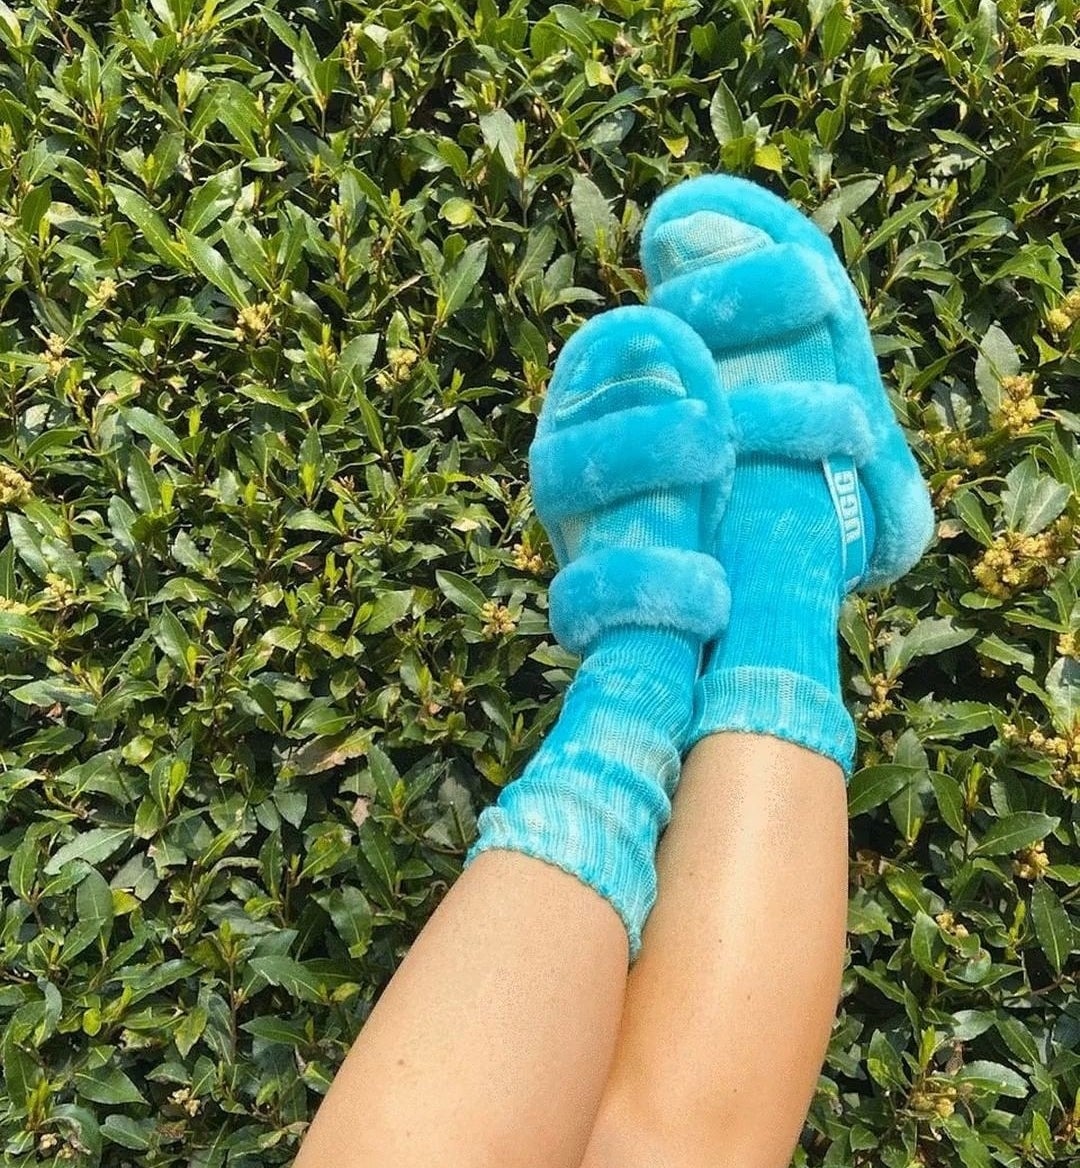 A person wearing the slippers with their feet up against a green wall